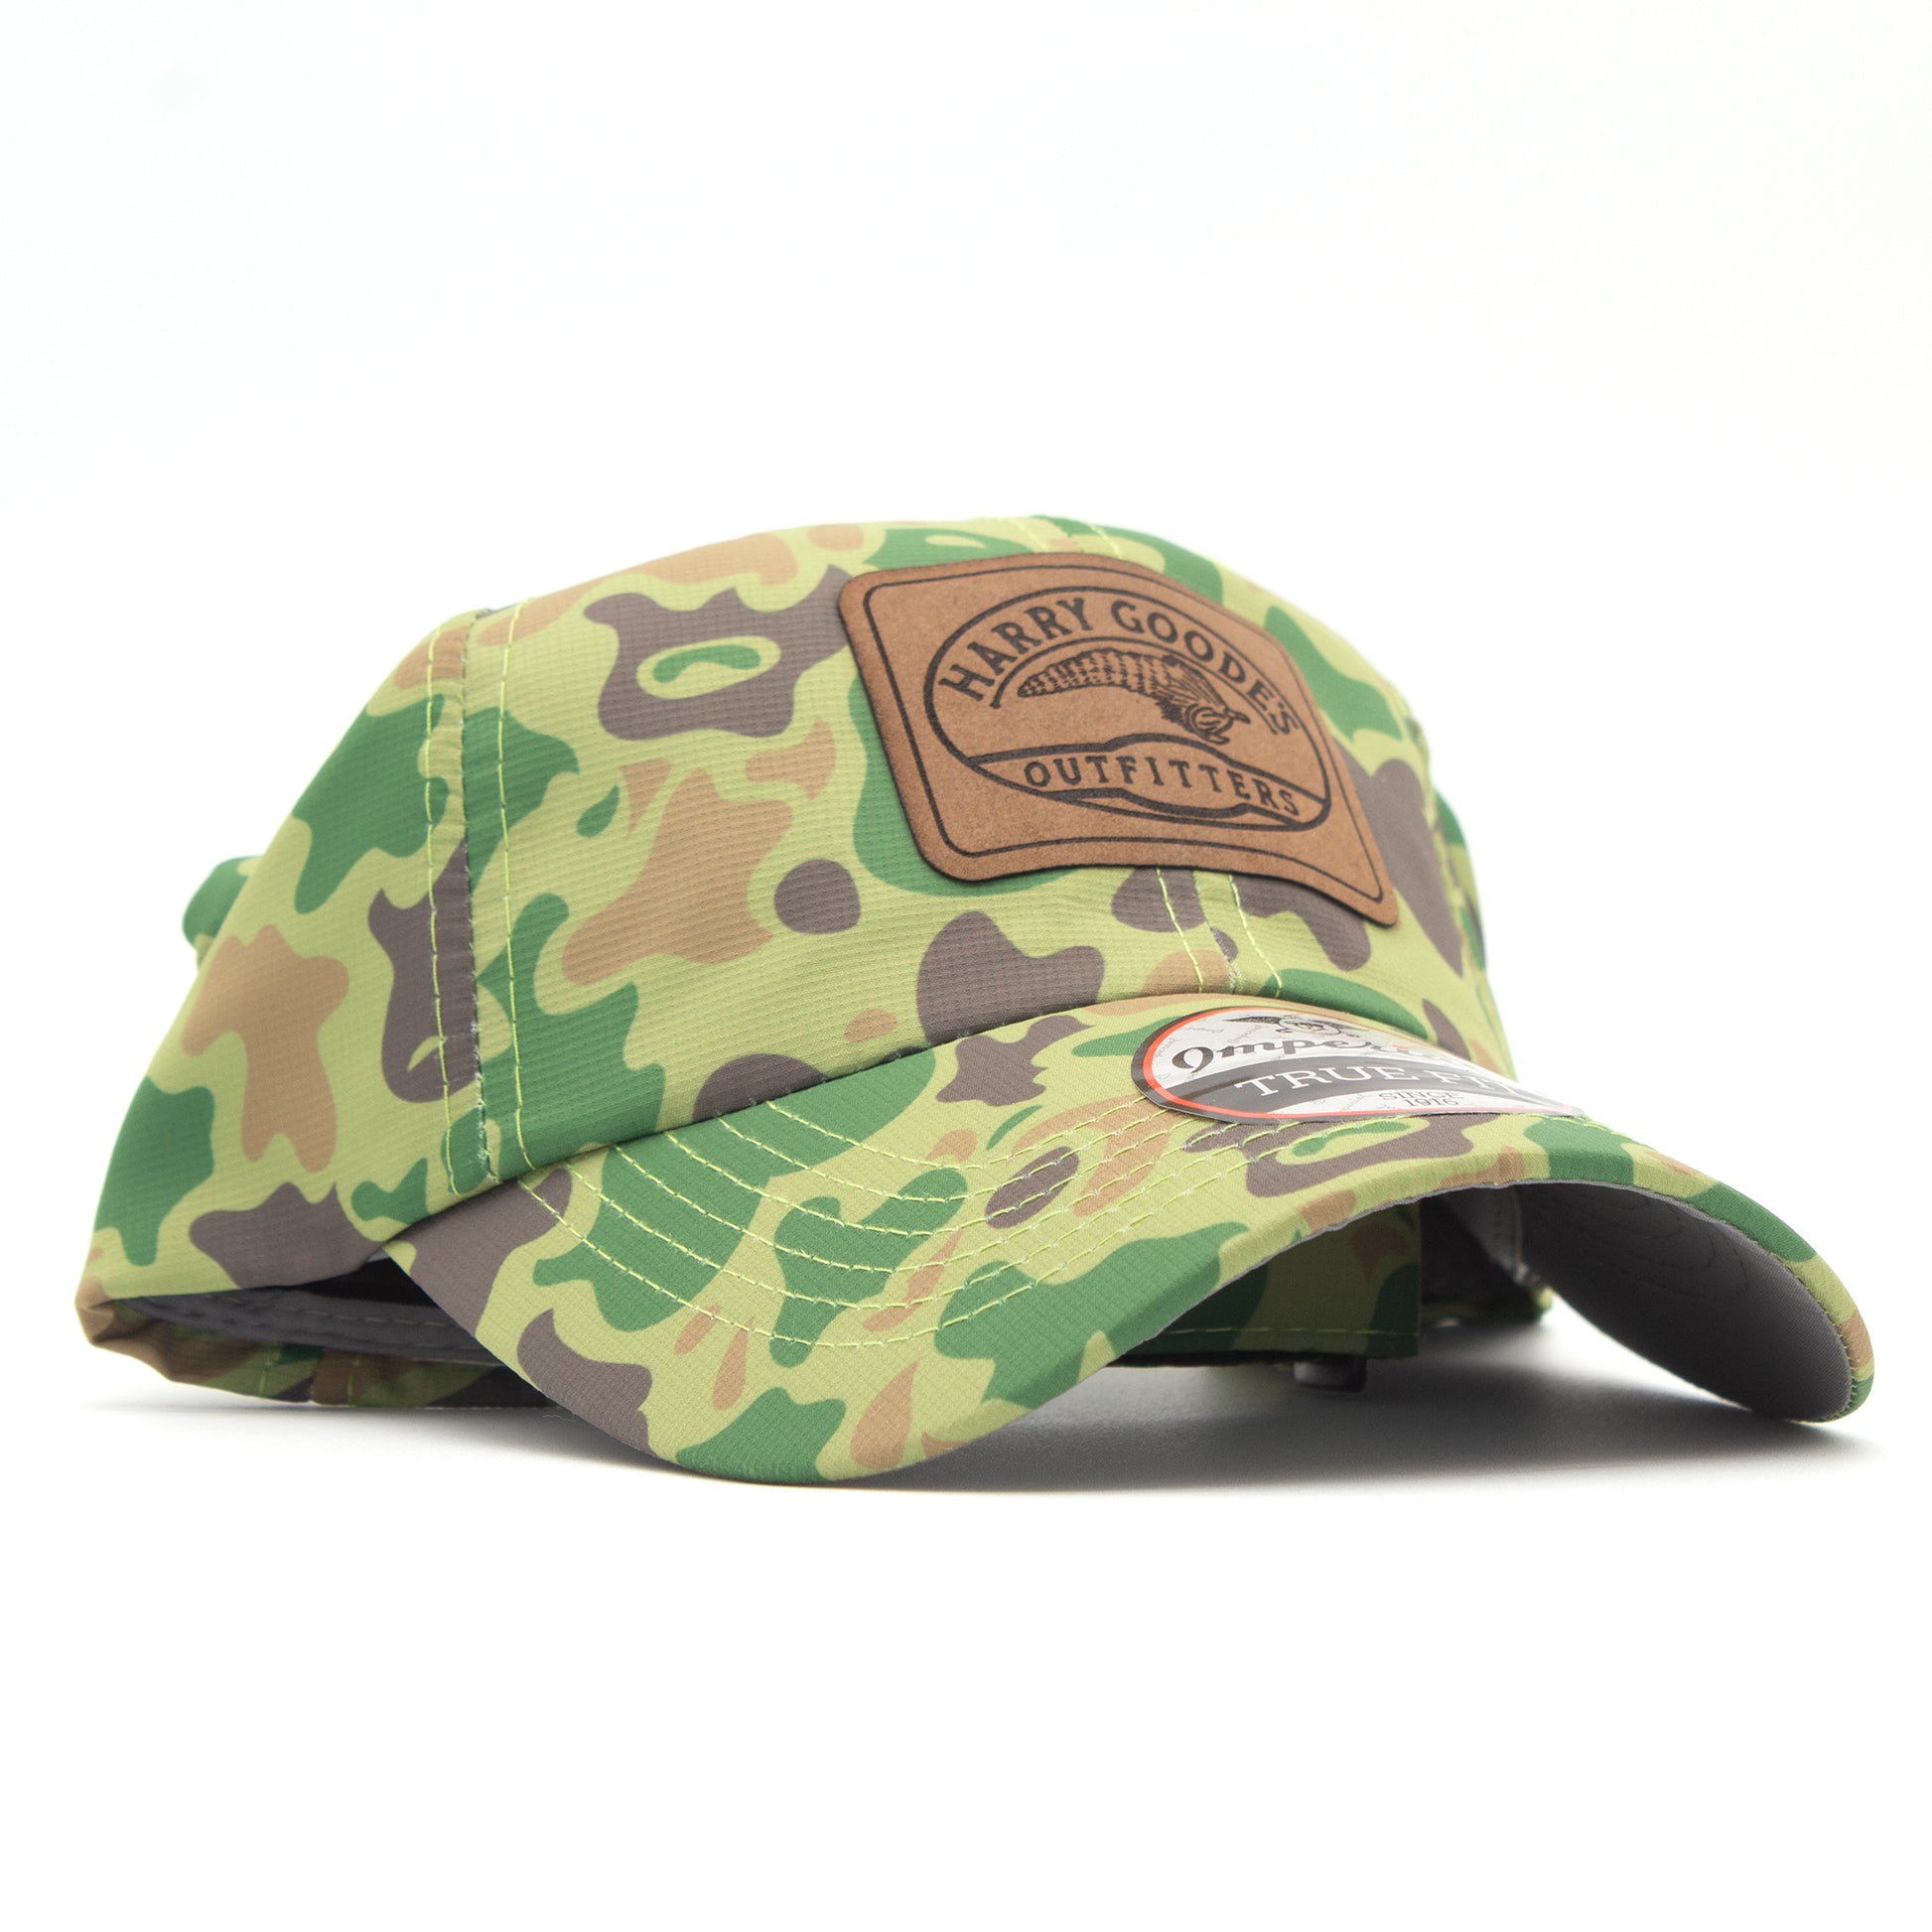 Harry Goode's Logo Alter Ego Hat – Harry Goode's Outfitters